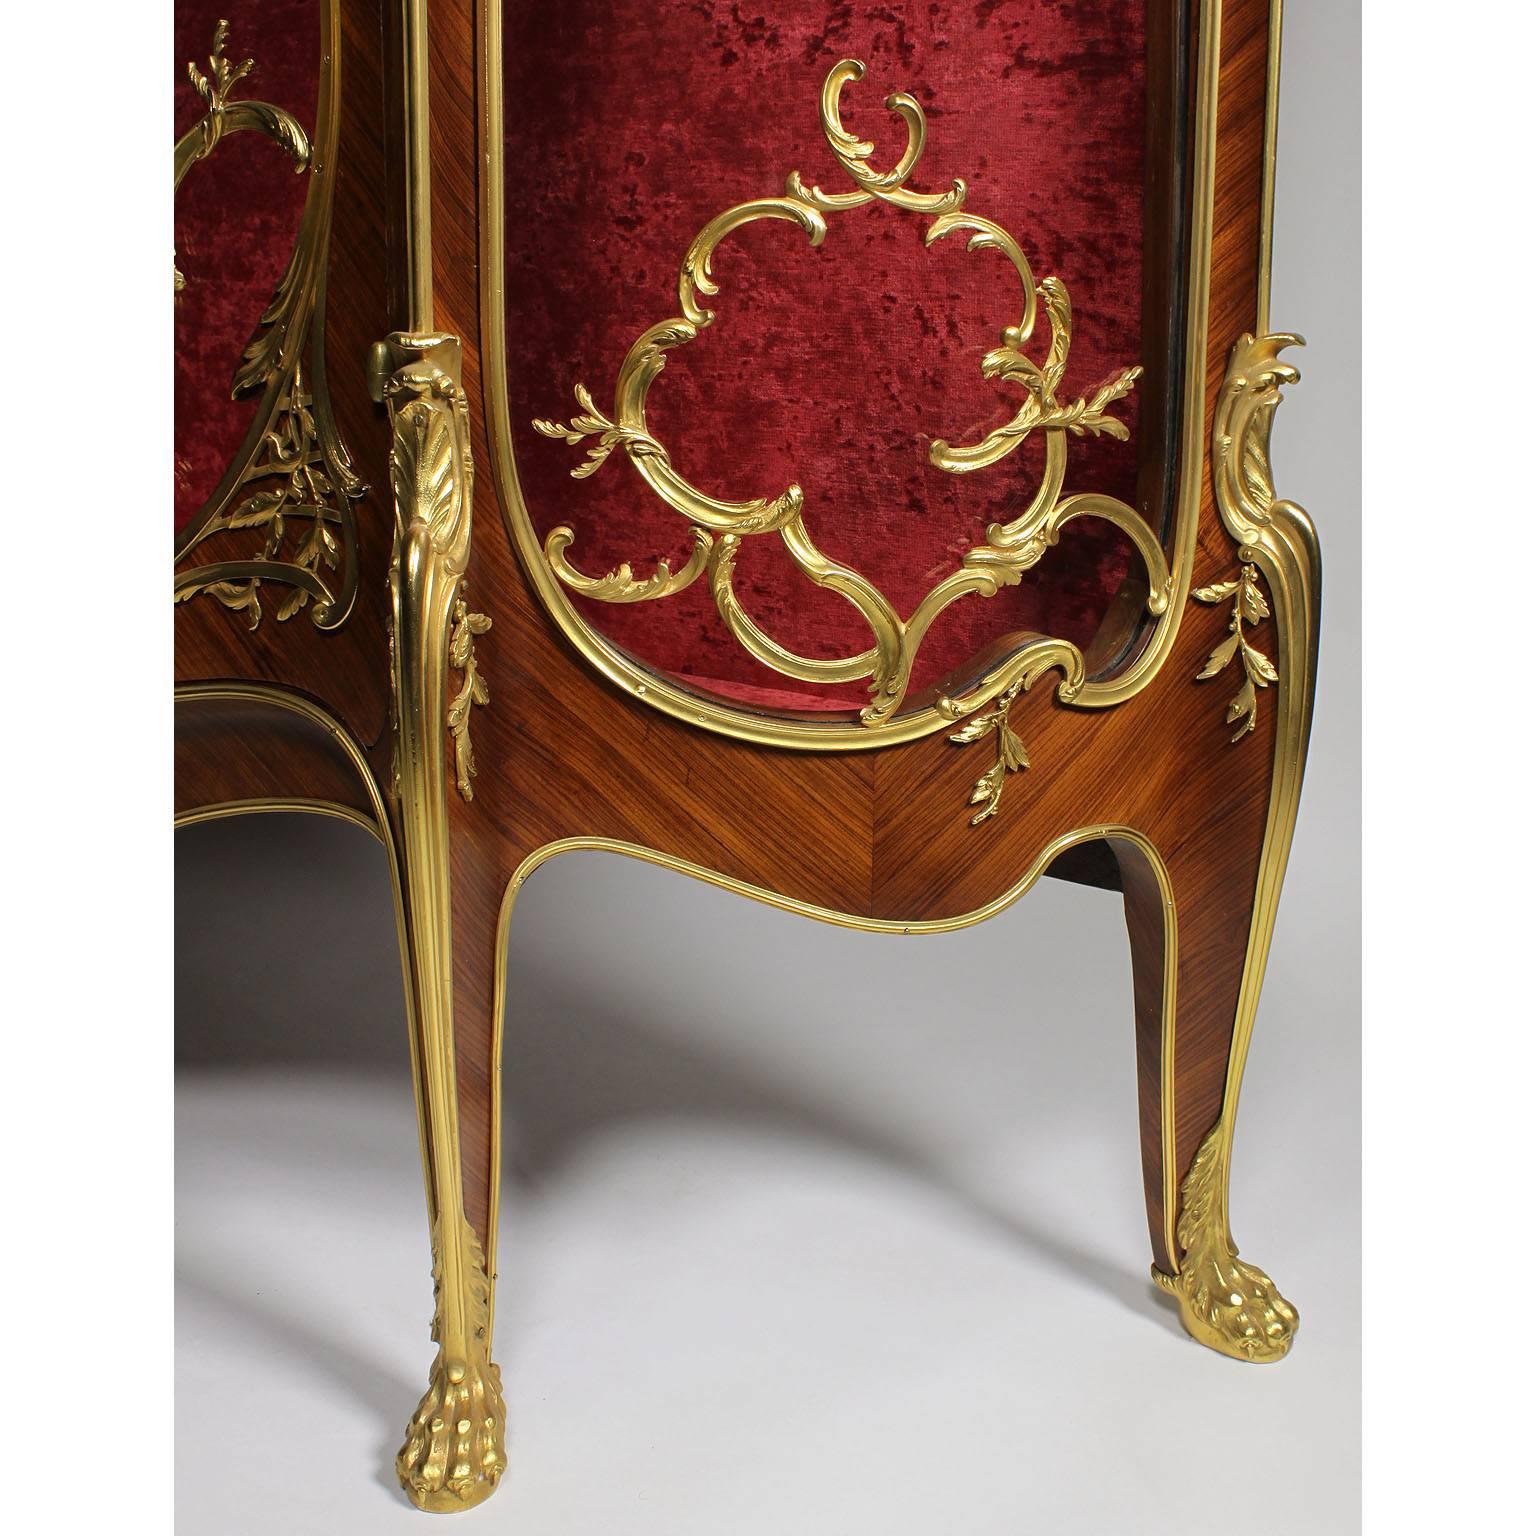 French 19th-20th Century Louis XV Style Kingwood and Ormolu Mounted Vitrine For Sale 3